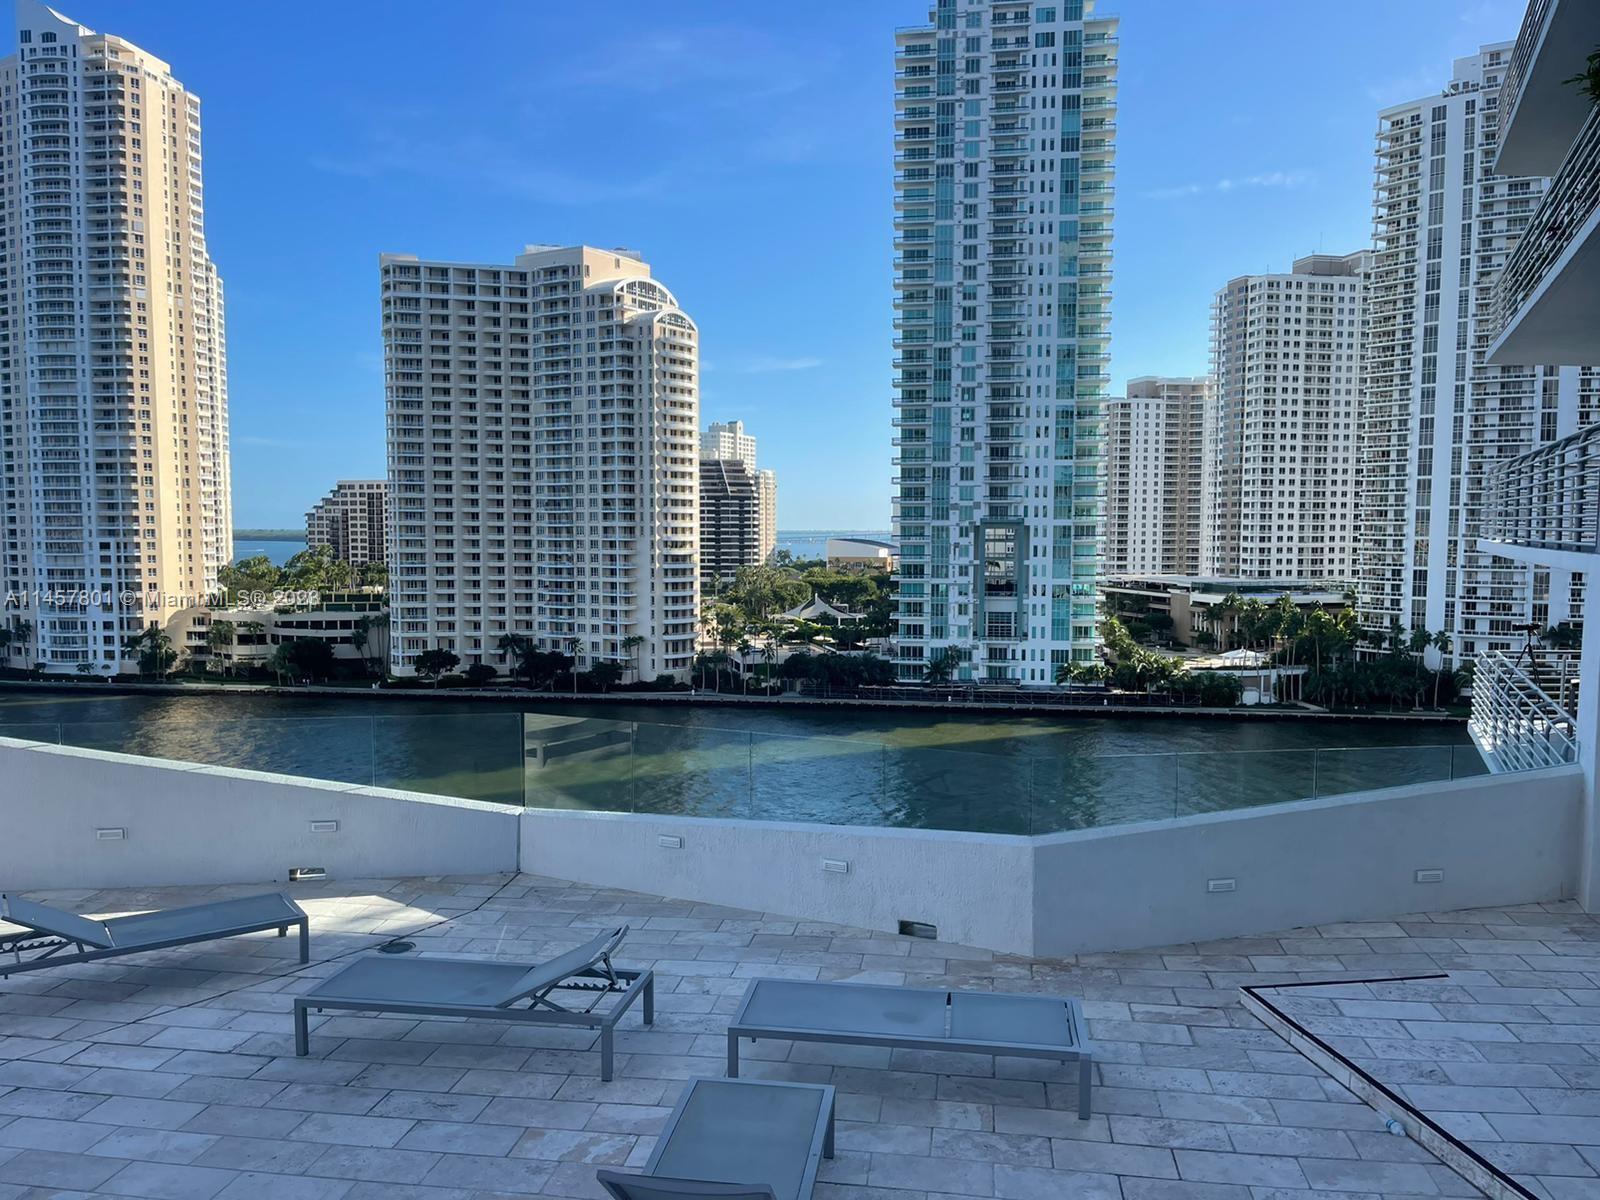 Condo of 1 bedroom in floor 37 with excellent views of water bay and city. Extraordinary building with amenities. Cozy apartment of 1 bedroom, 1 full bath, balcony, open design with high impact windows & high ceilings. Opportunity to live in an important area close to the main activities in Miami. You need at least with 1 day in advance to make an appointment. Easy to show.